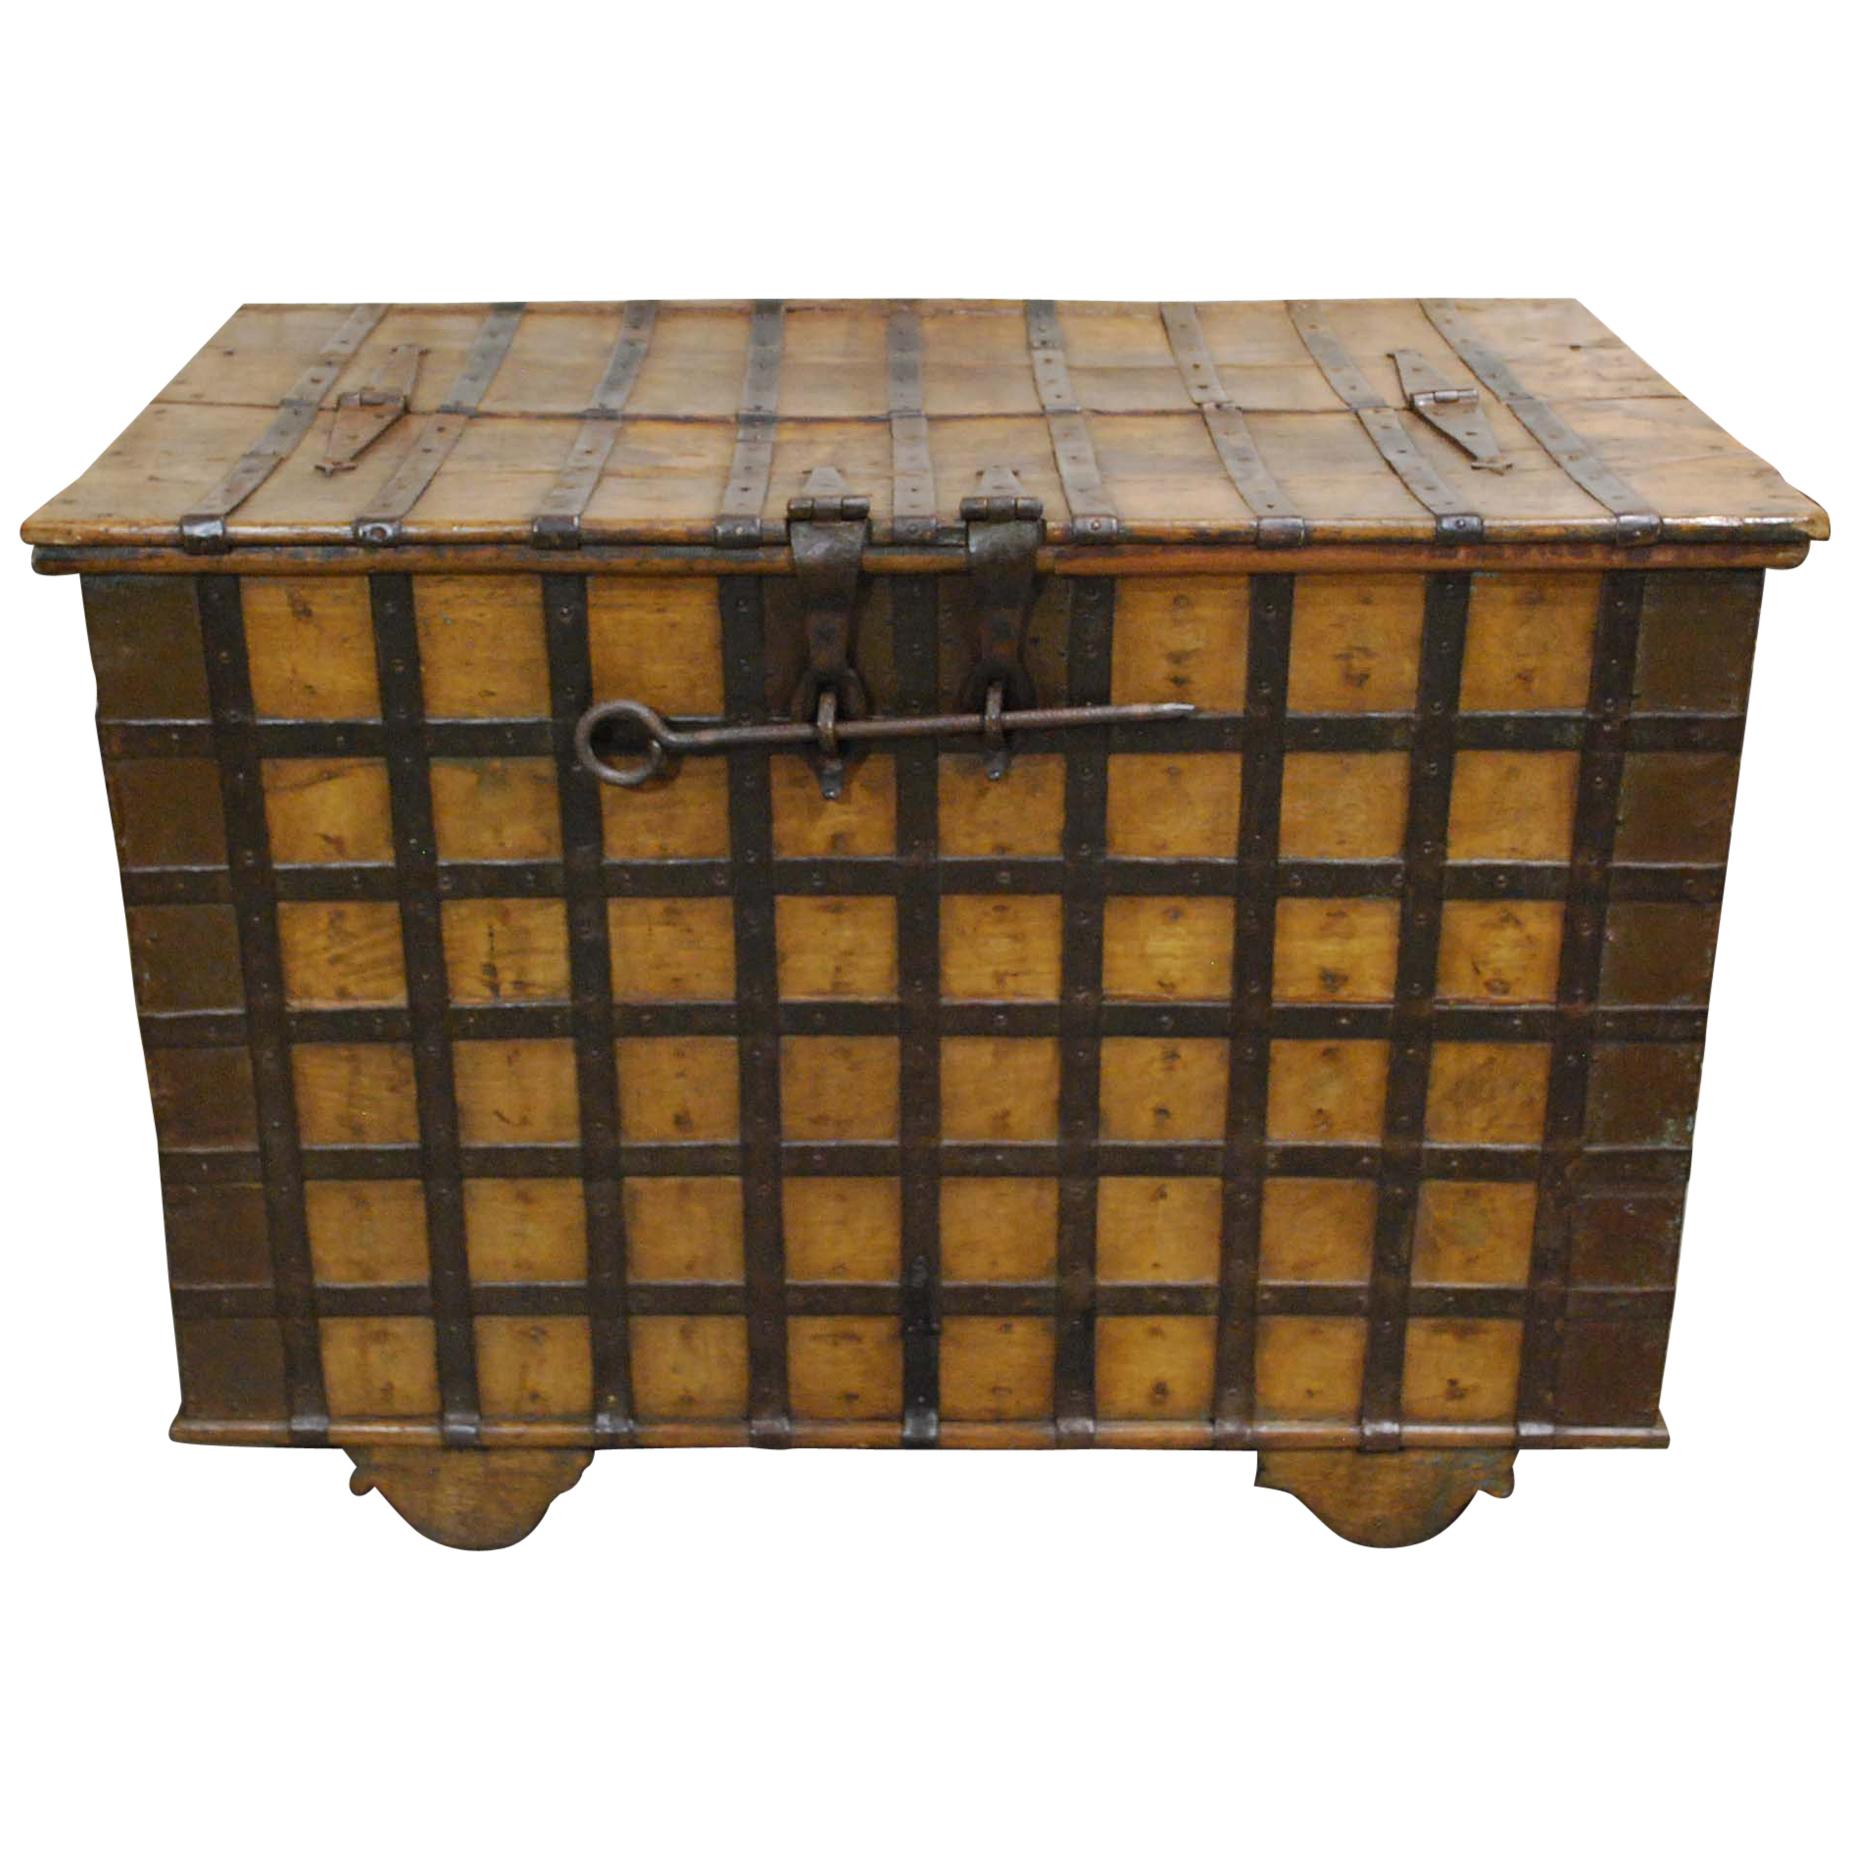 Antique 19th Century Anglo-Indian Haveli Trunk with Iron-Clad Fittings